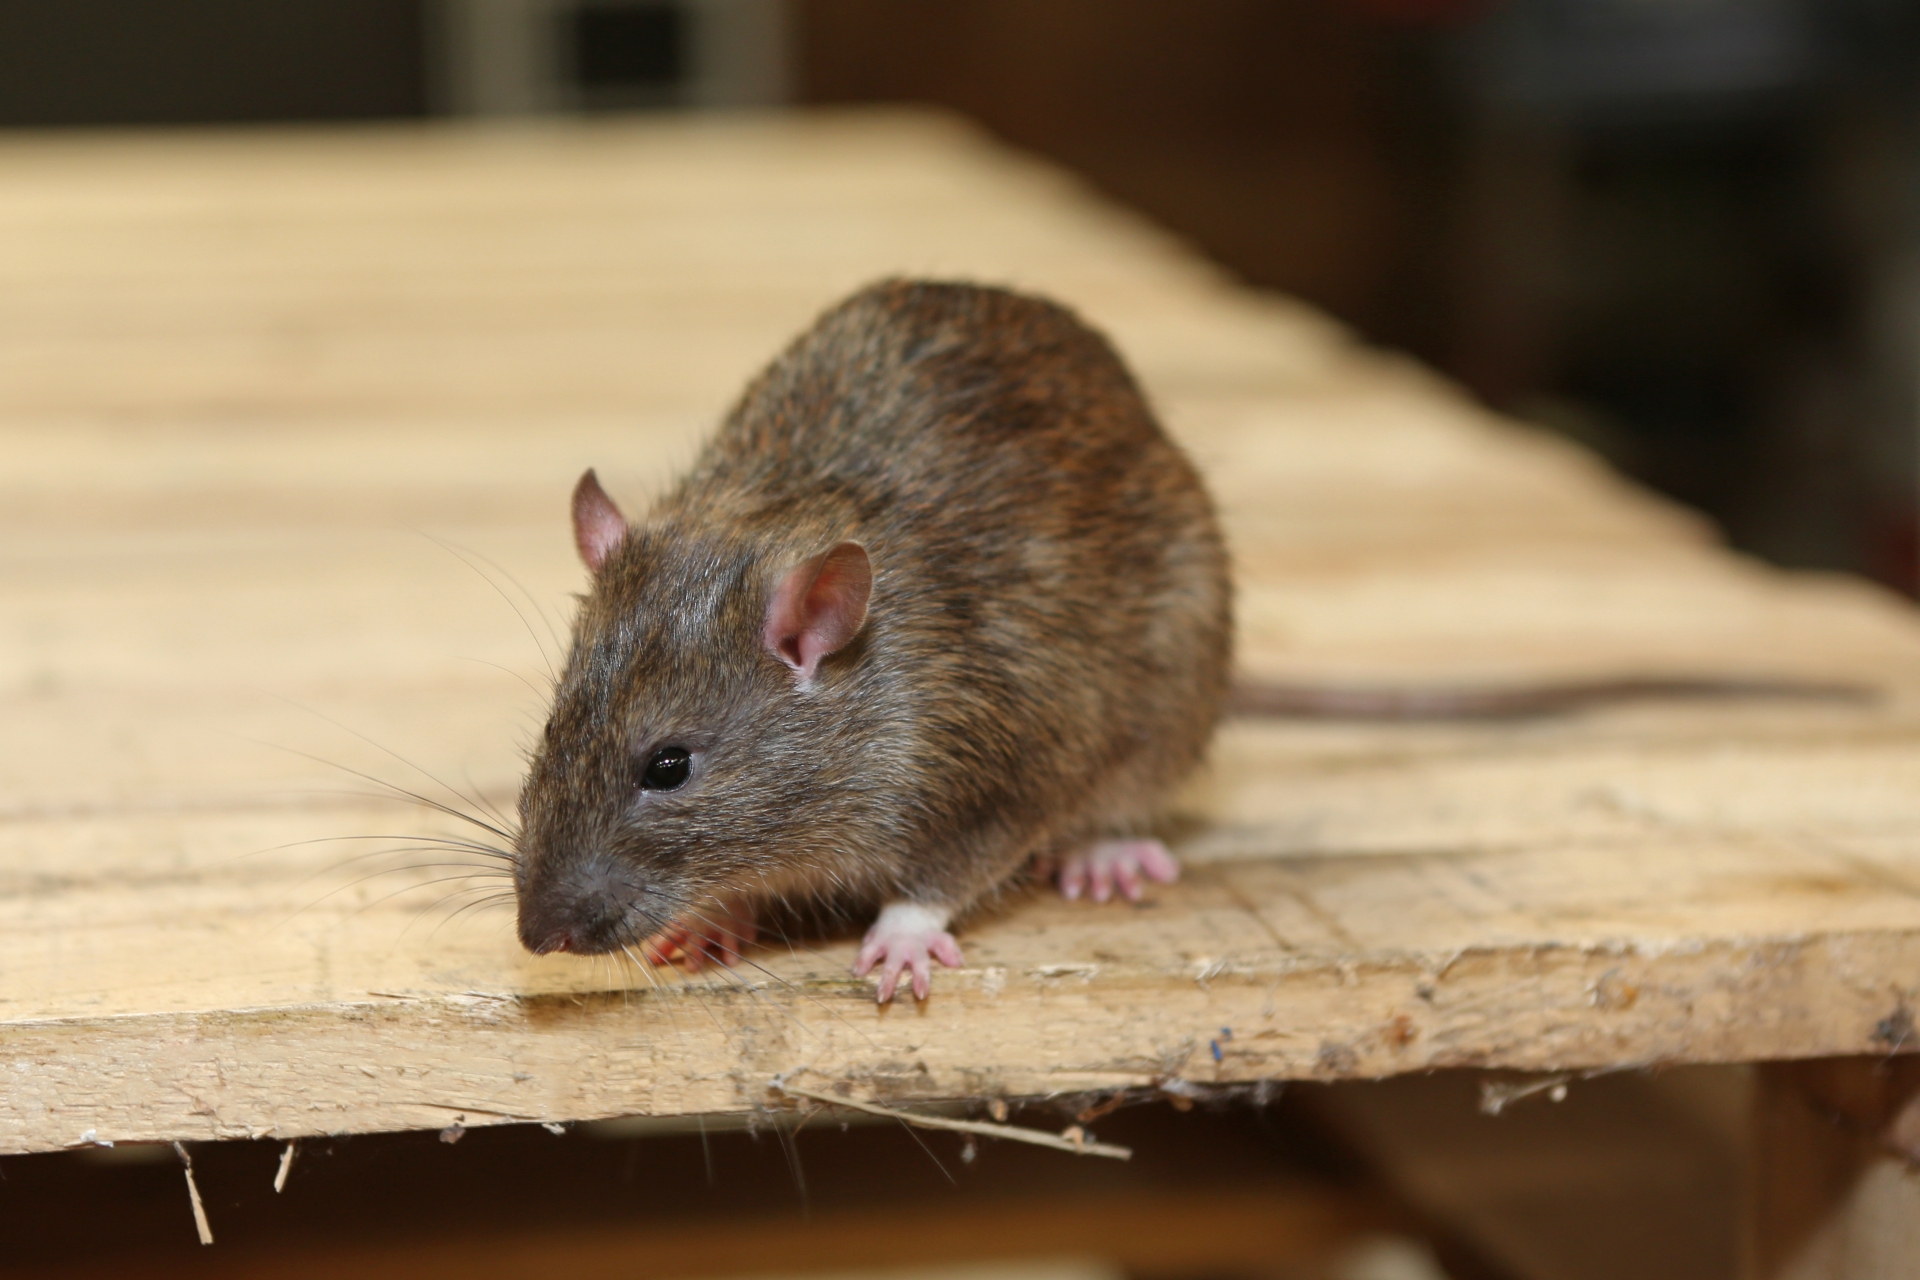 Rat extermination, Pest Control in Rotherhithe, South Bermondsey, Surrey Docks, SE16. Call Now 020 8166 9746